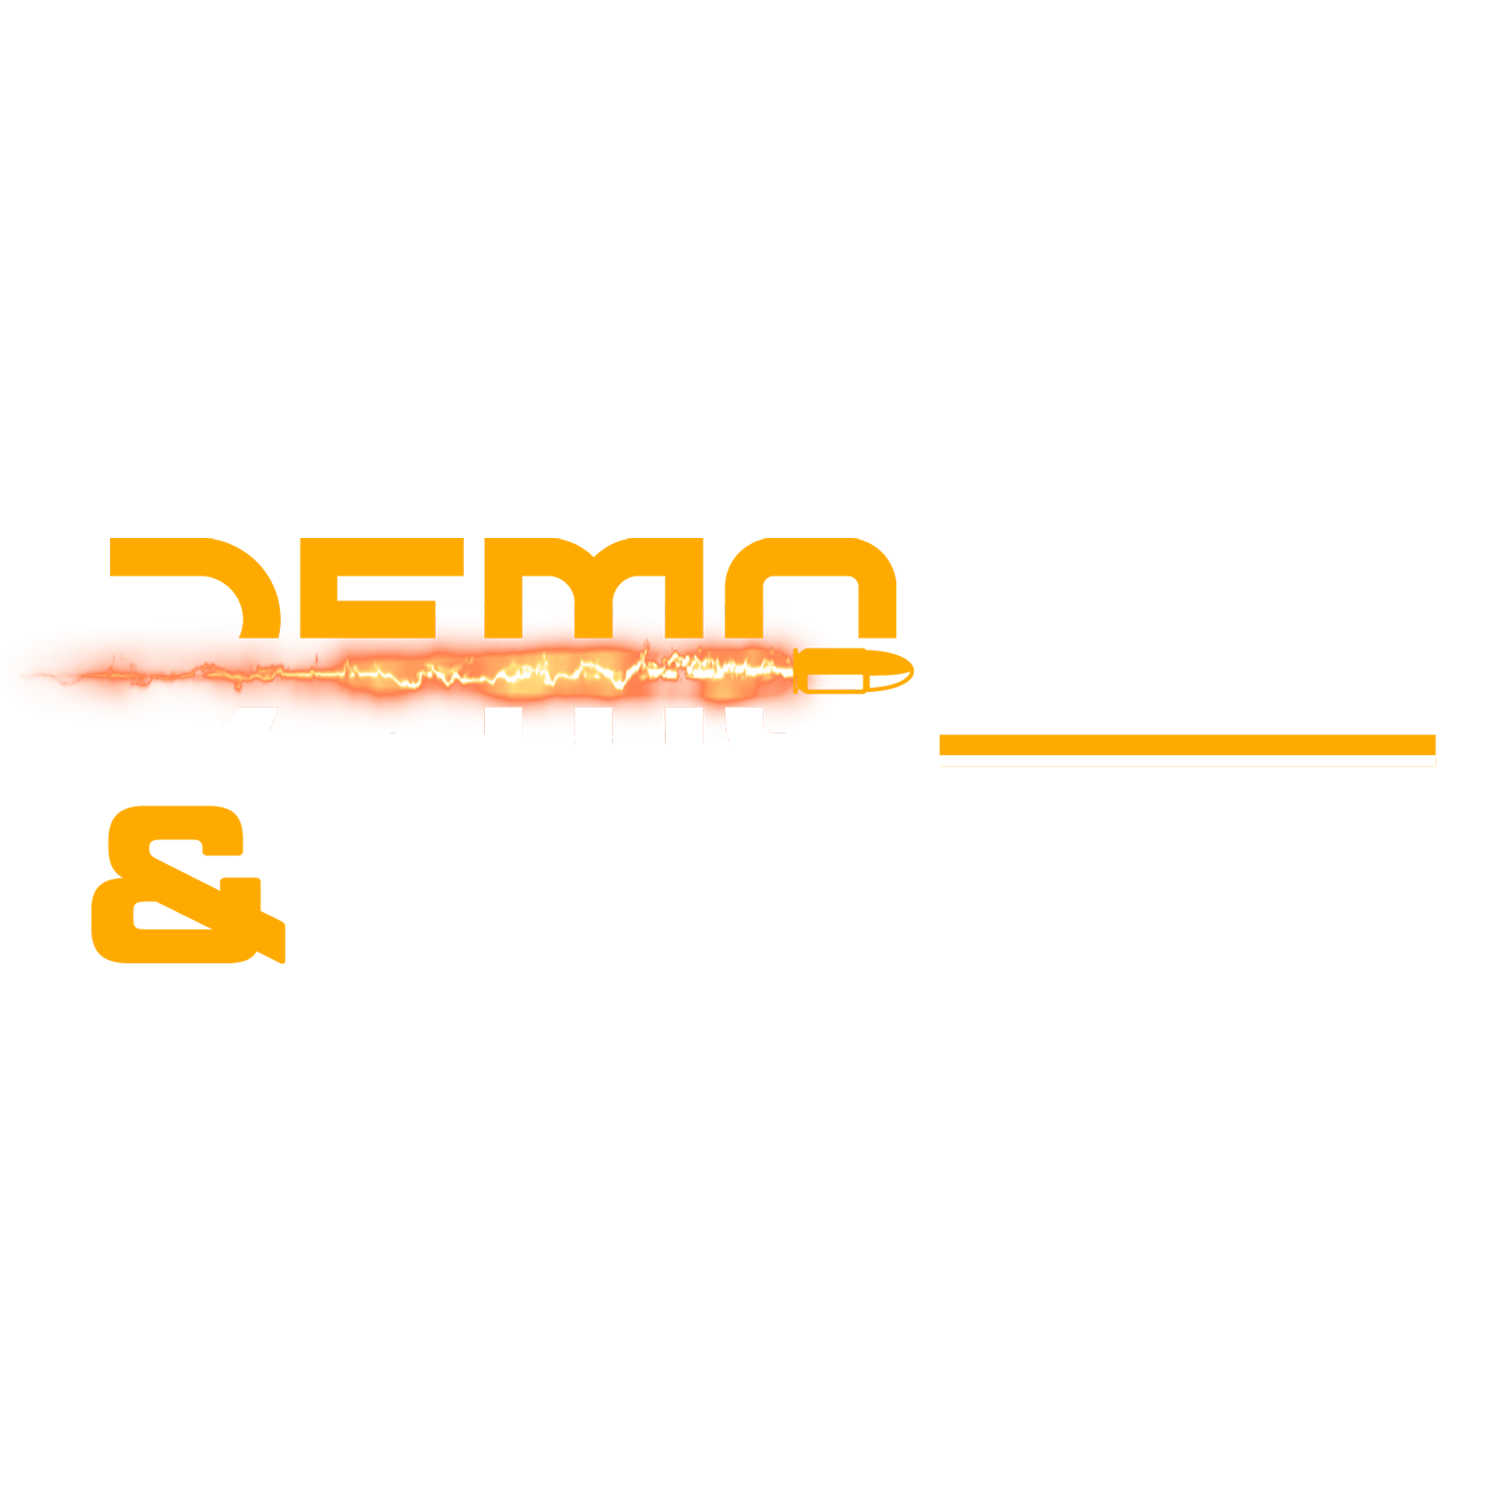 Demo & Review #2